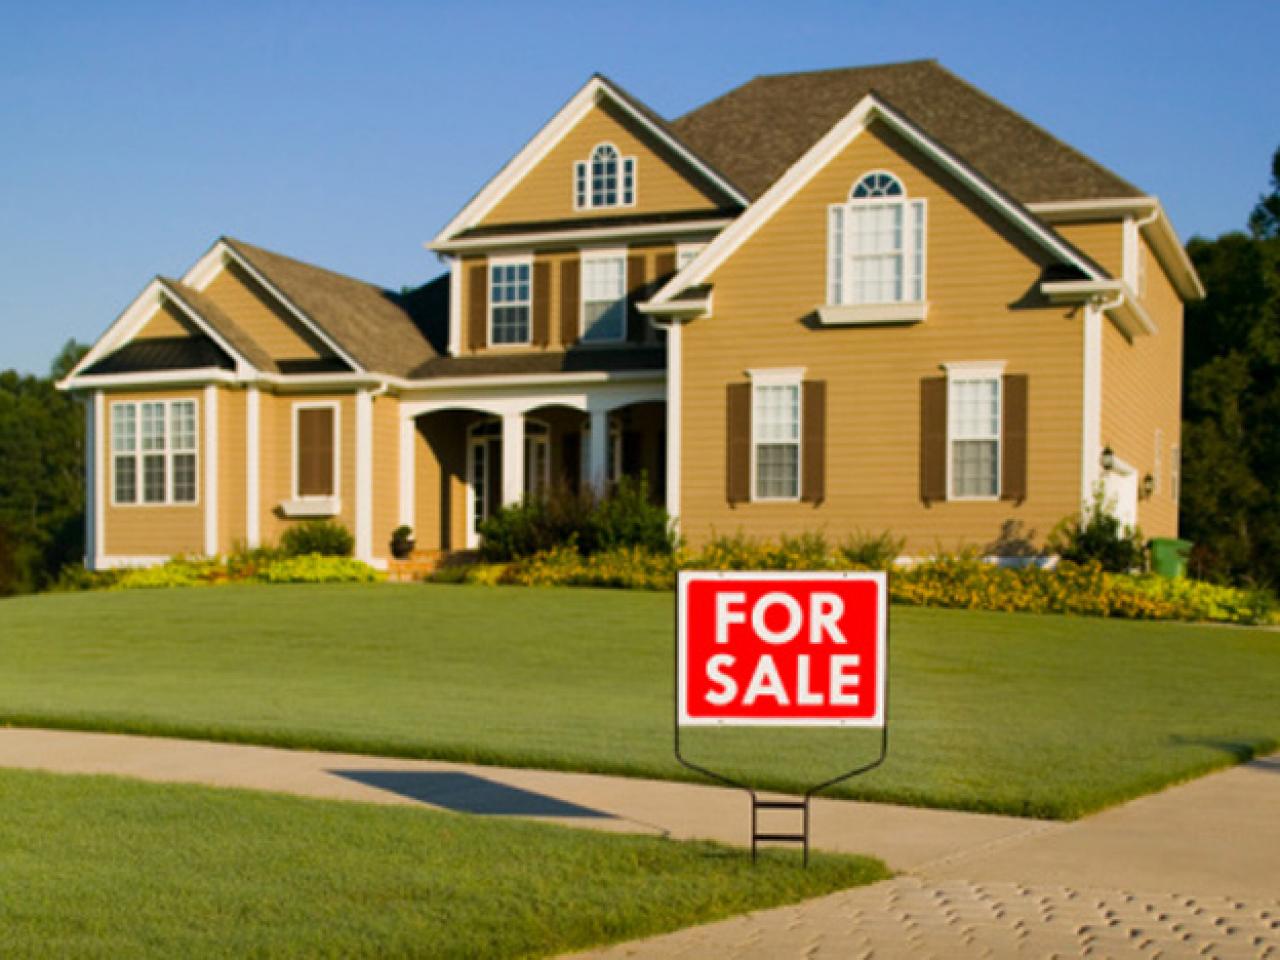 easiest ways of selling a house